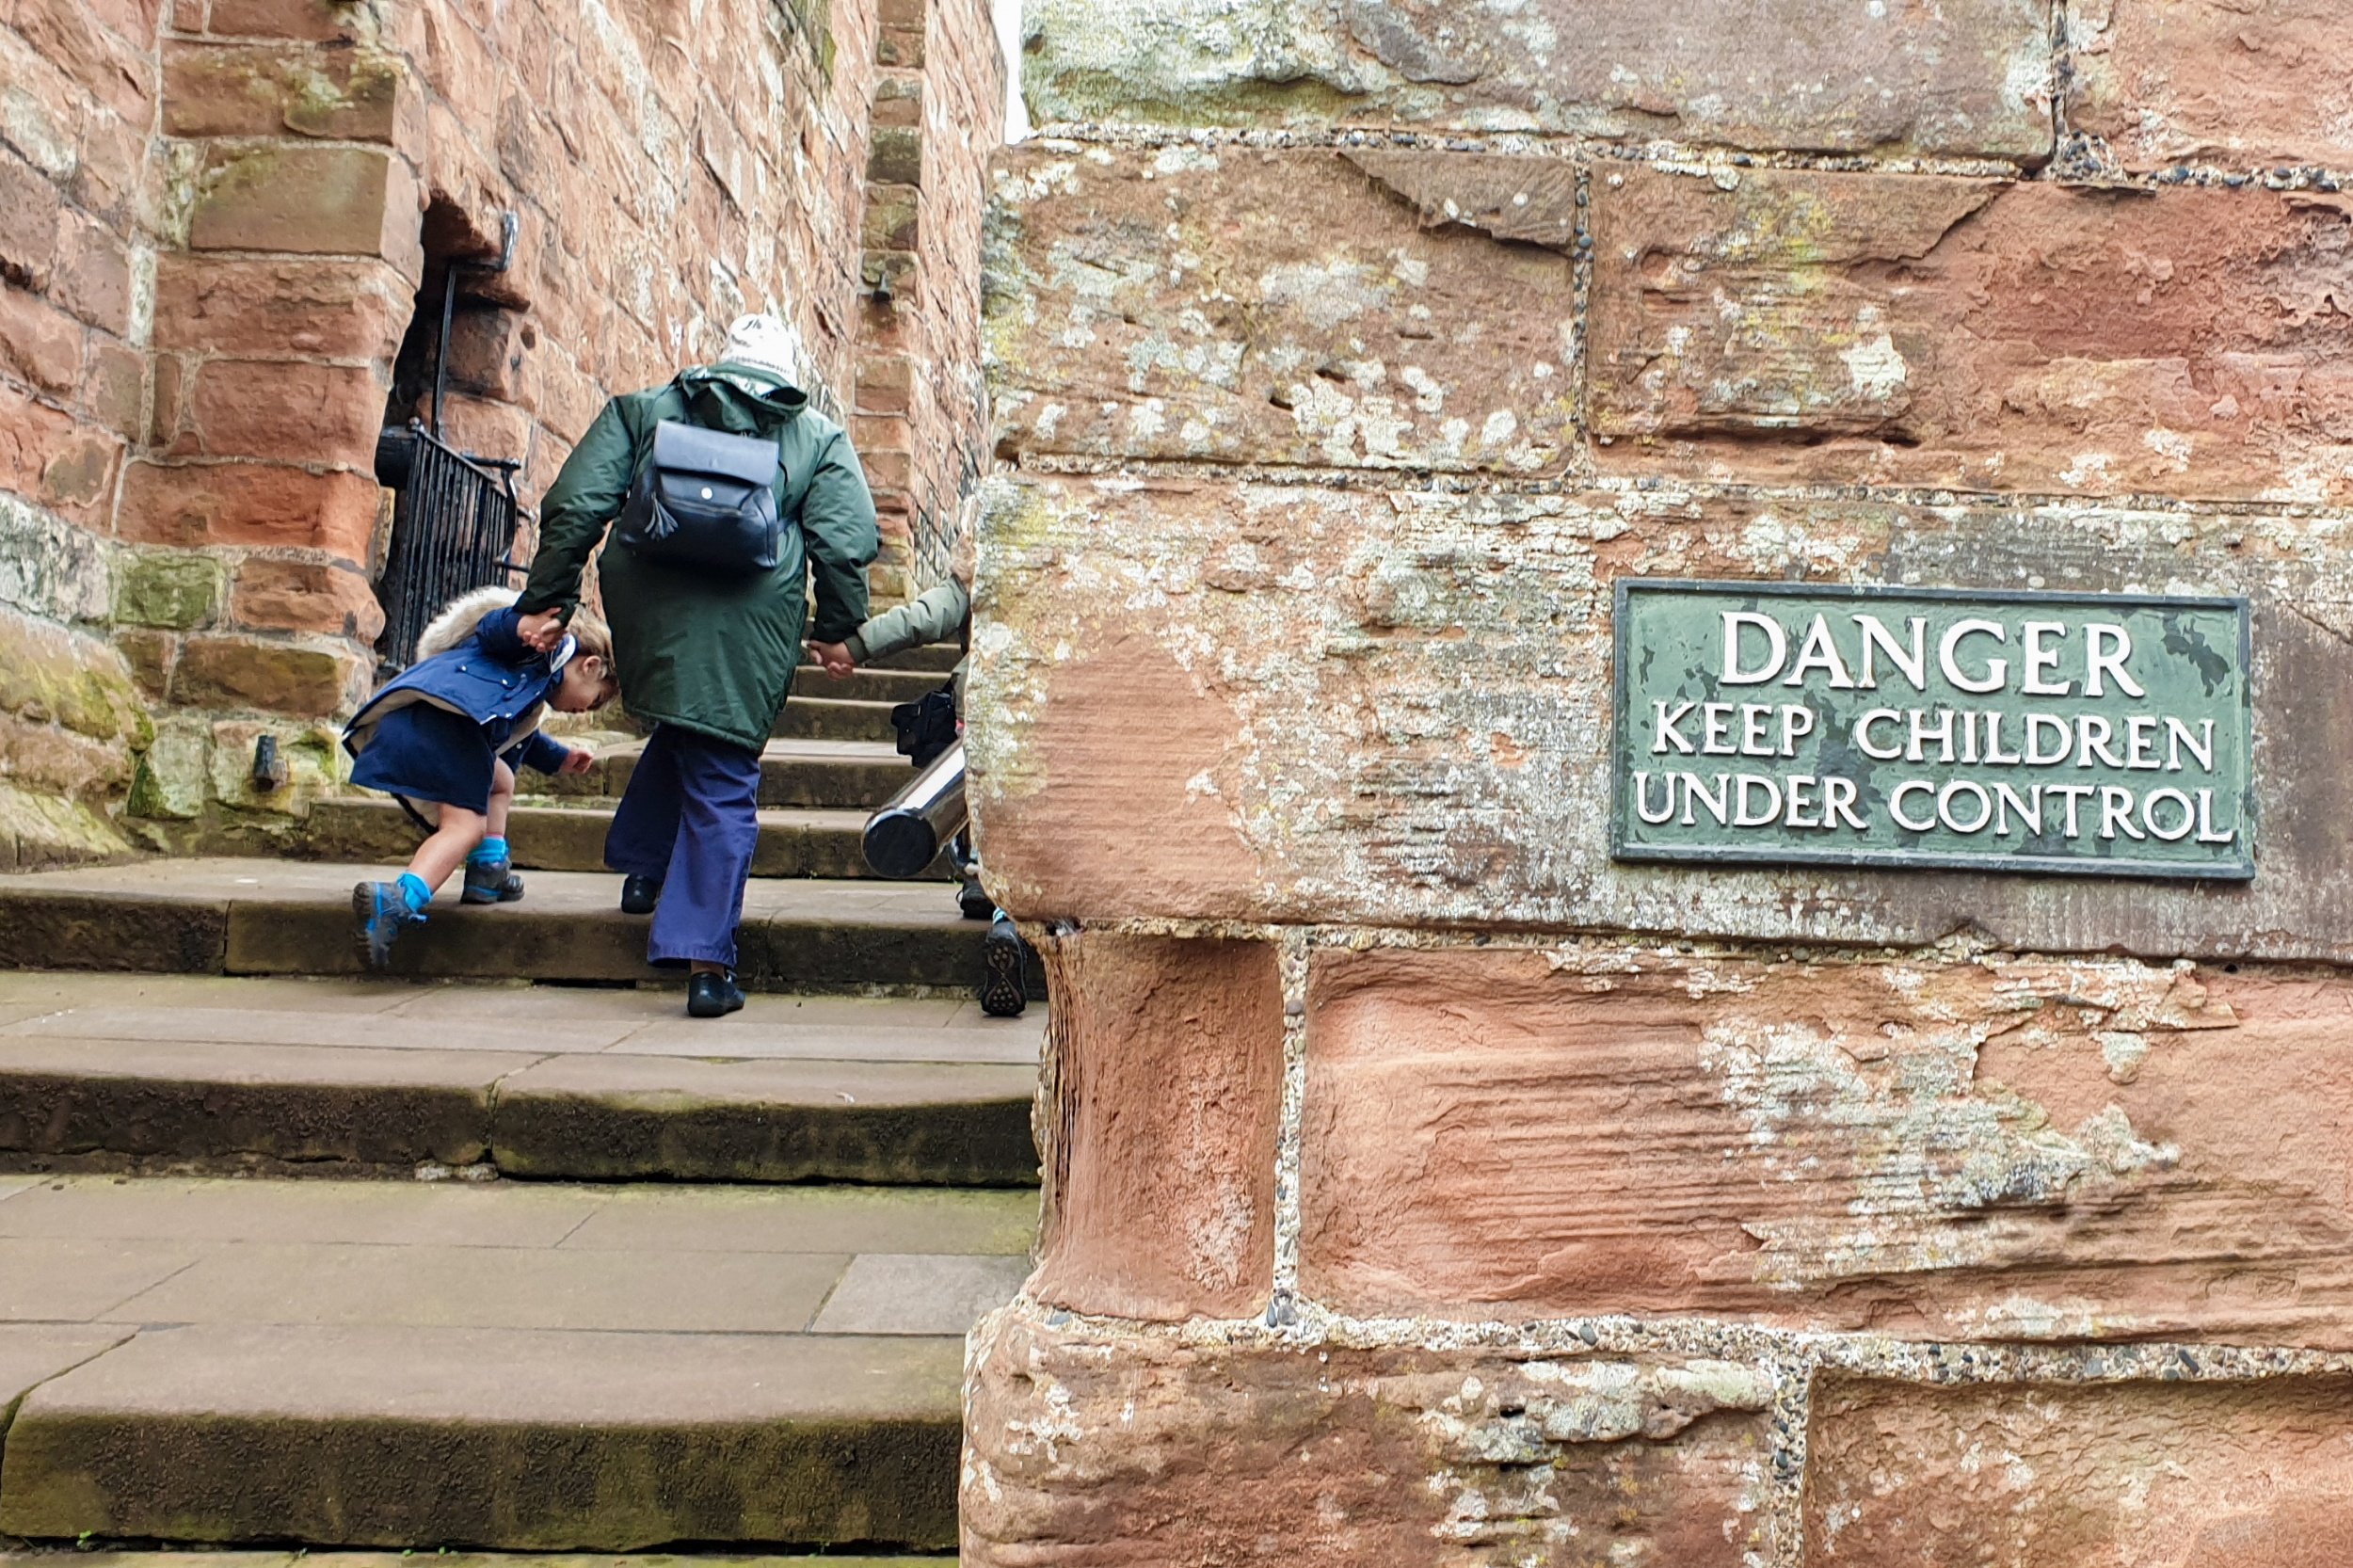 Squidgy and Pickle are holding their Grandma's hand and walking up the steps inside Carlisle castle. A sign on the wall beside them says, "Danger, keep children under control".